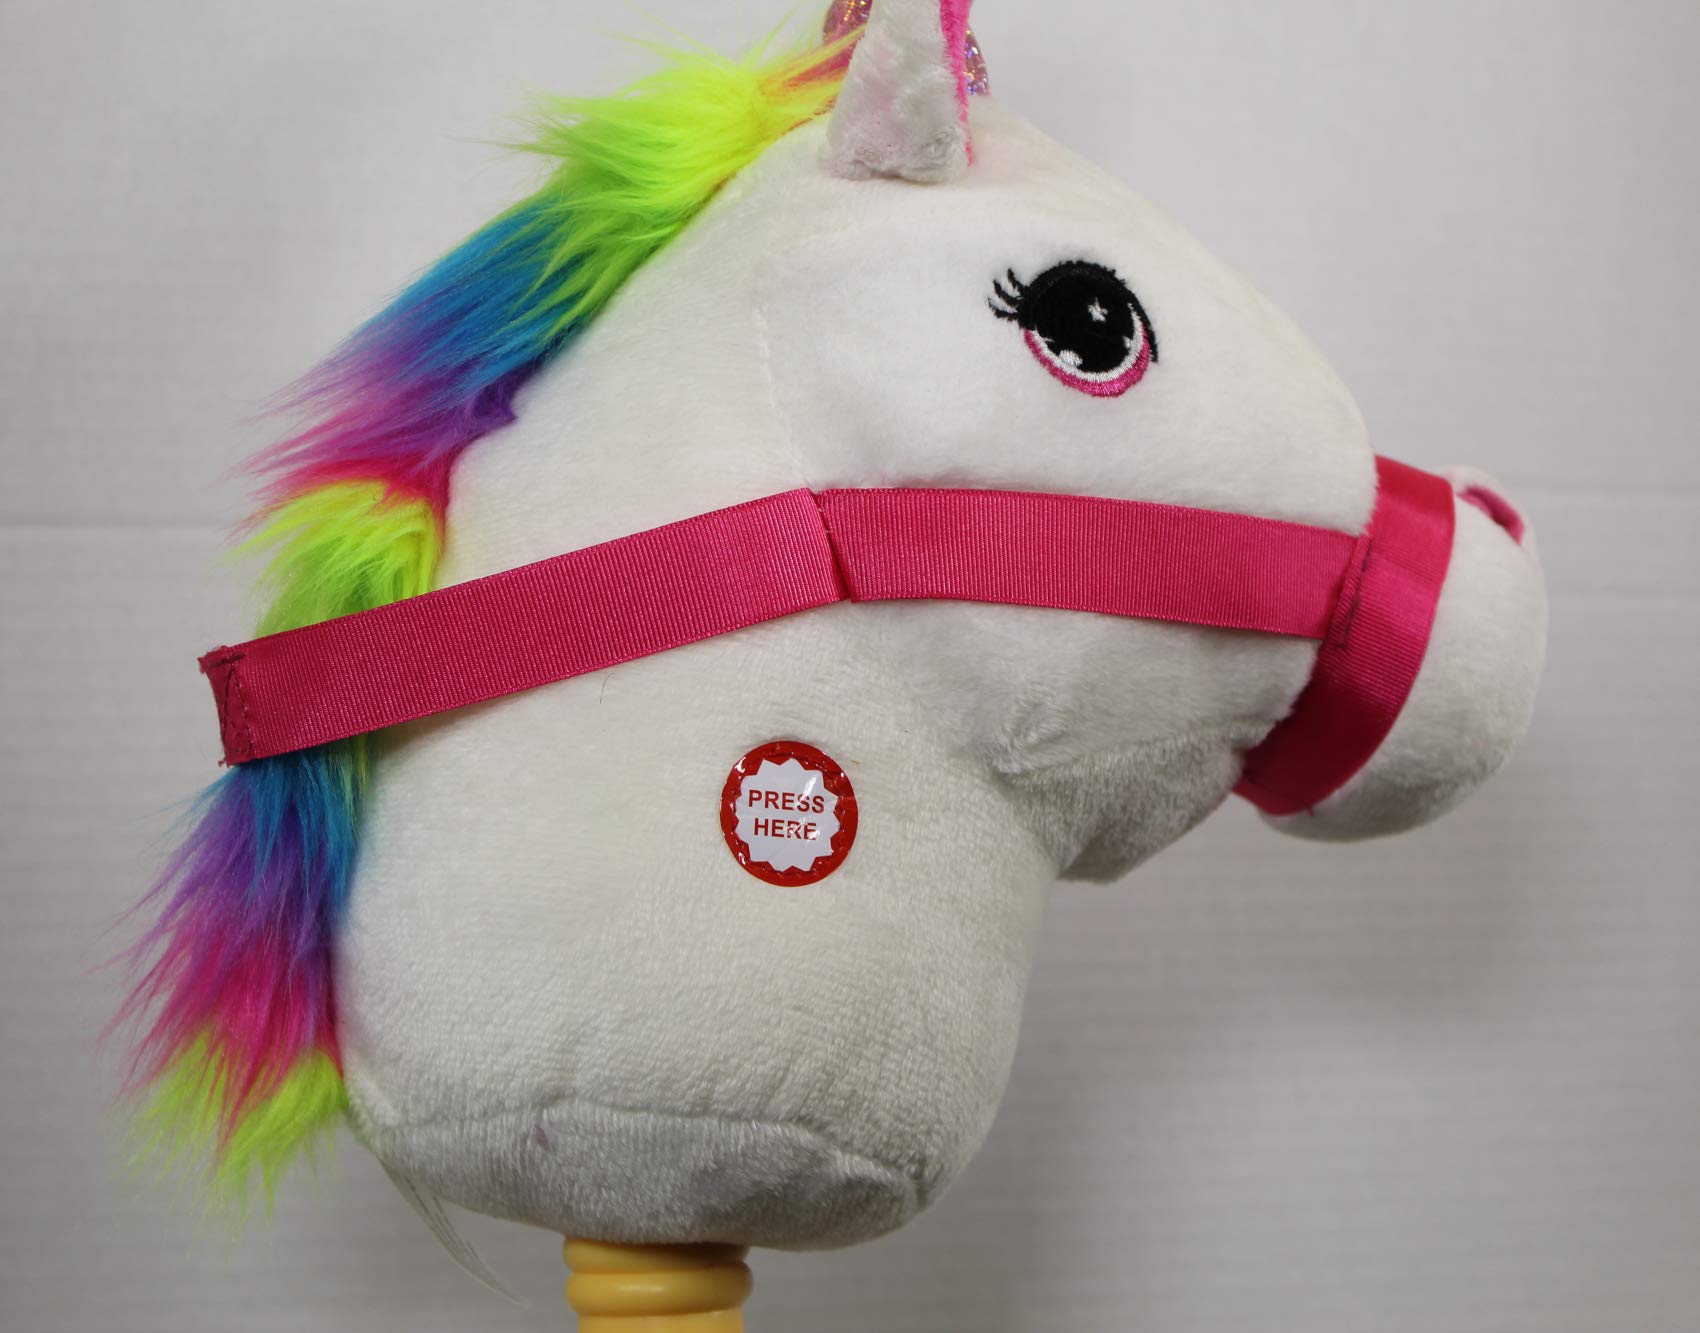 PonyLand: White Unicorn Stick Horse, Sound Effects That Make The Unicorn Come to Life, Sturdy 2 Piece Stick That Screws Together, for Ages 3 and up